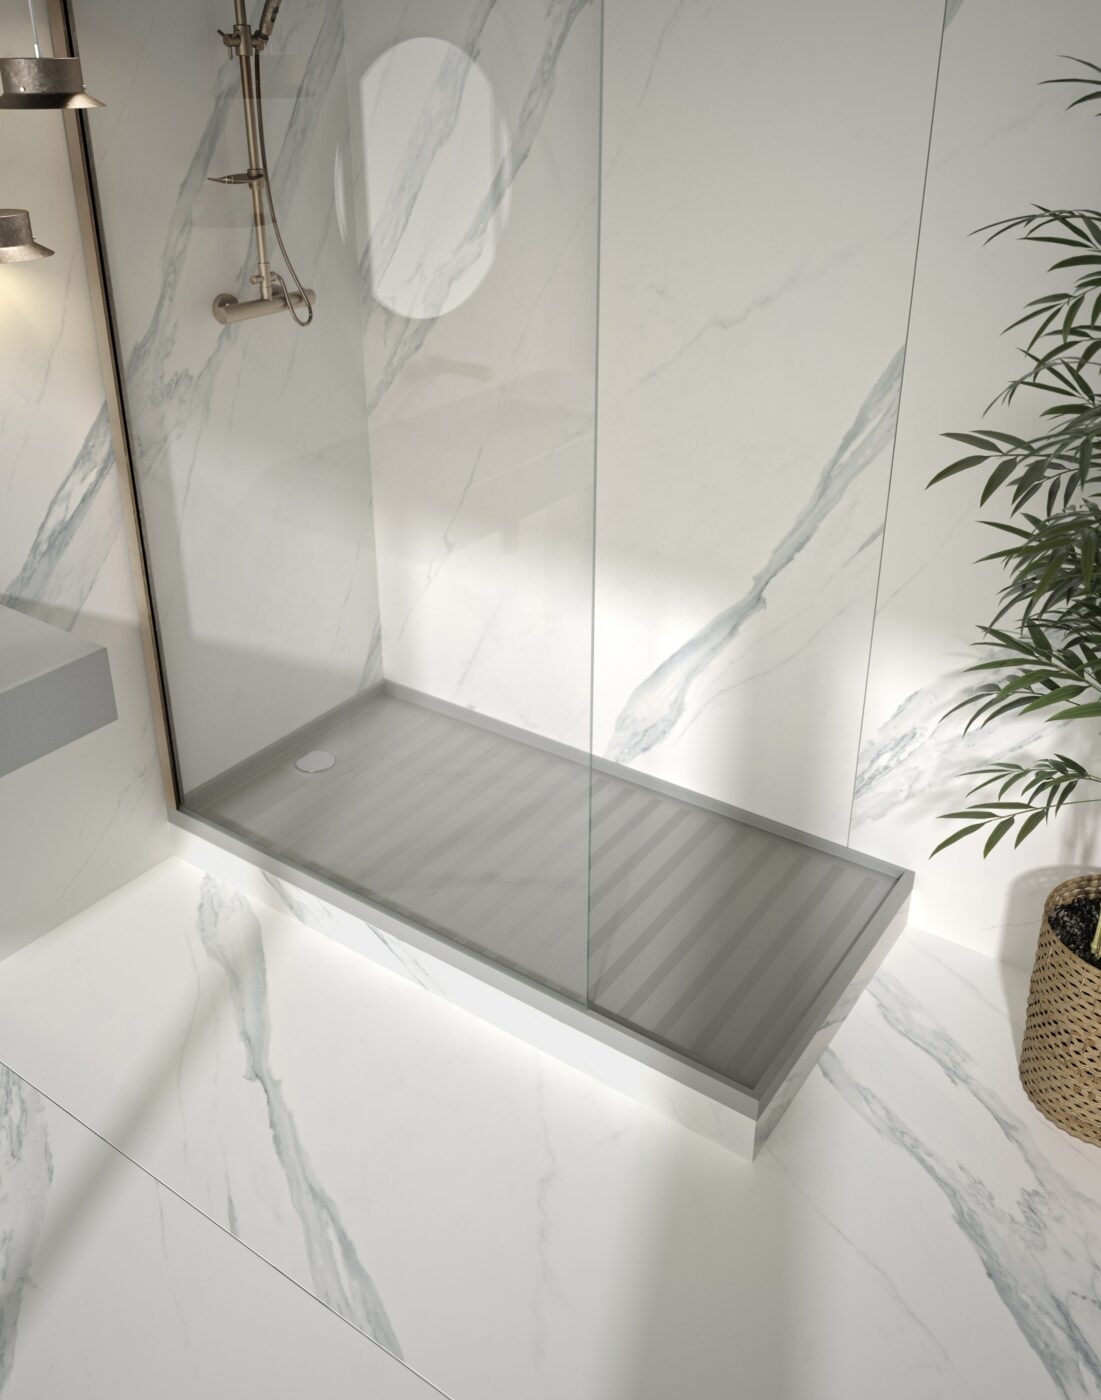 Image of Dekton Opera Wall Cladding and Silestone Kador Shower Tray in Kensho 2 in Small bathrooms: the great secrets of their design - Cosentino